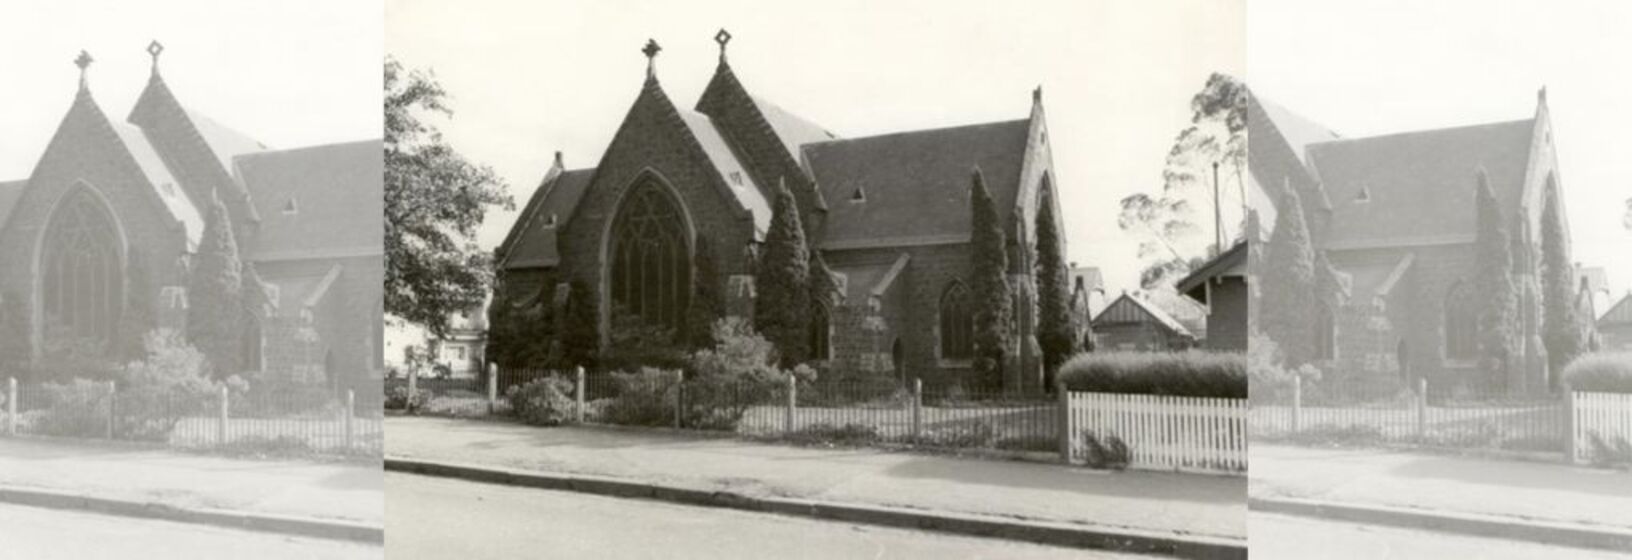 Sepia image of a church set back from the road